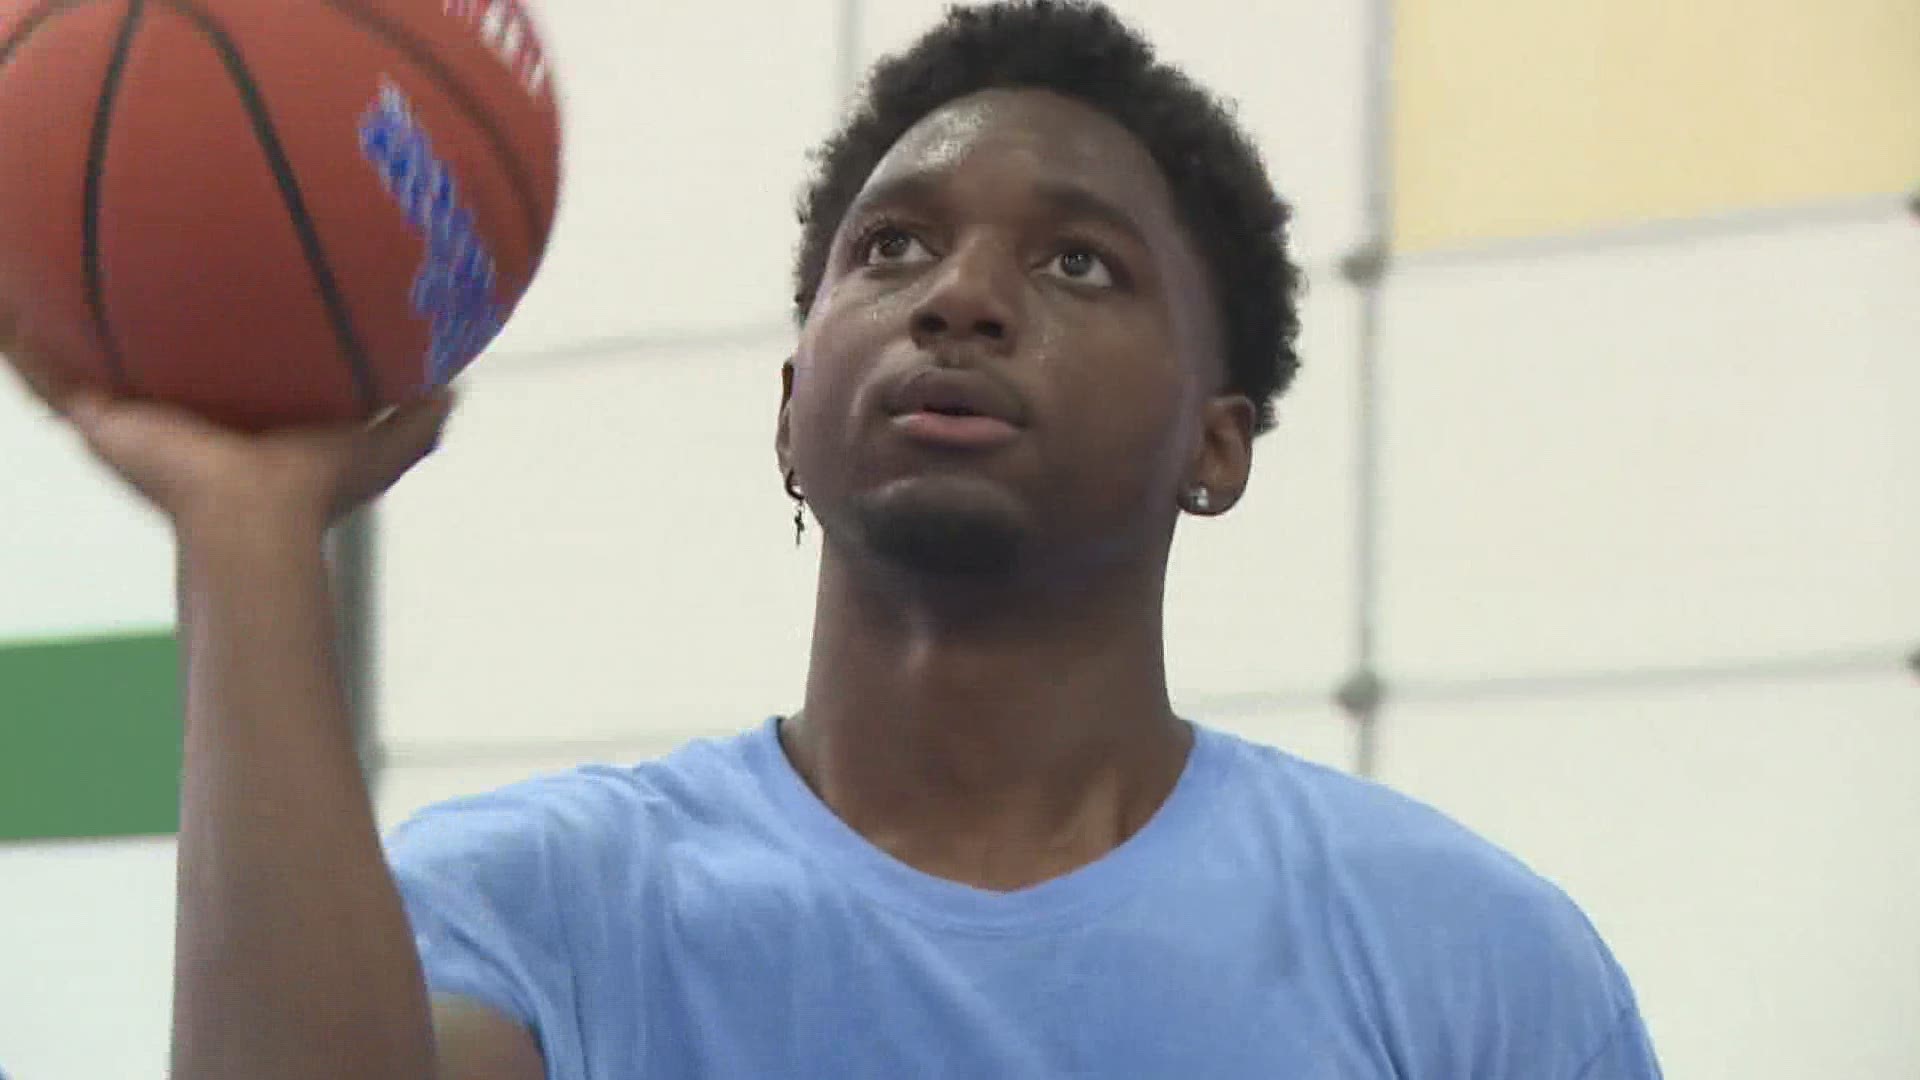 A Wyoming basketball player is taking a different route to chasing his basketball dreams.